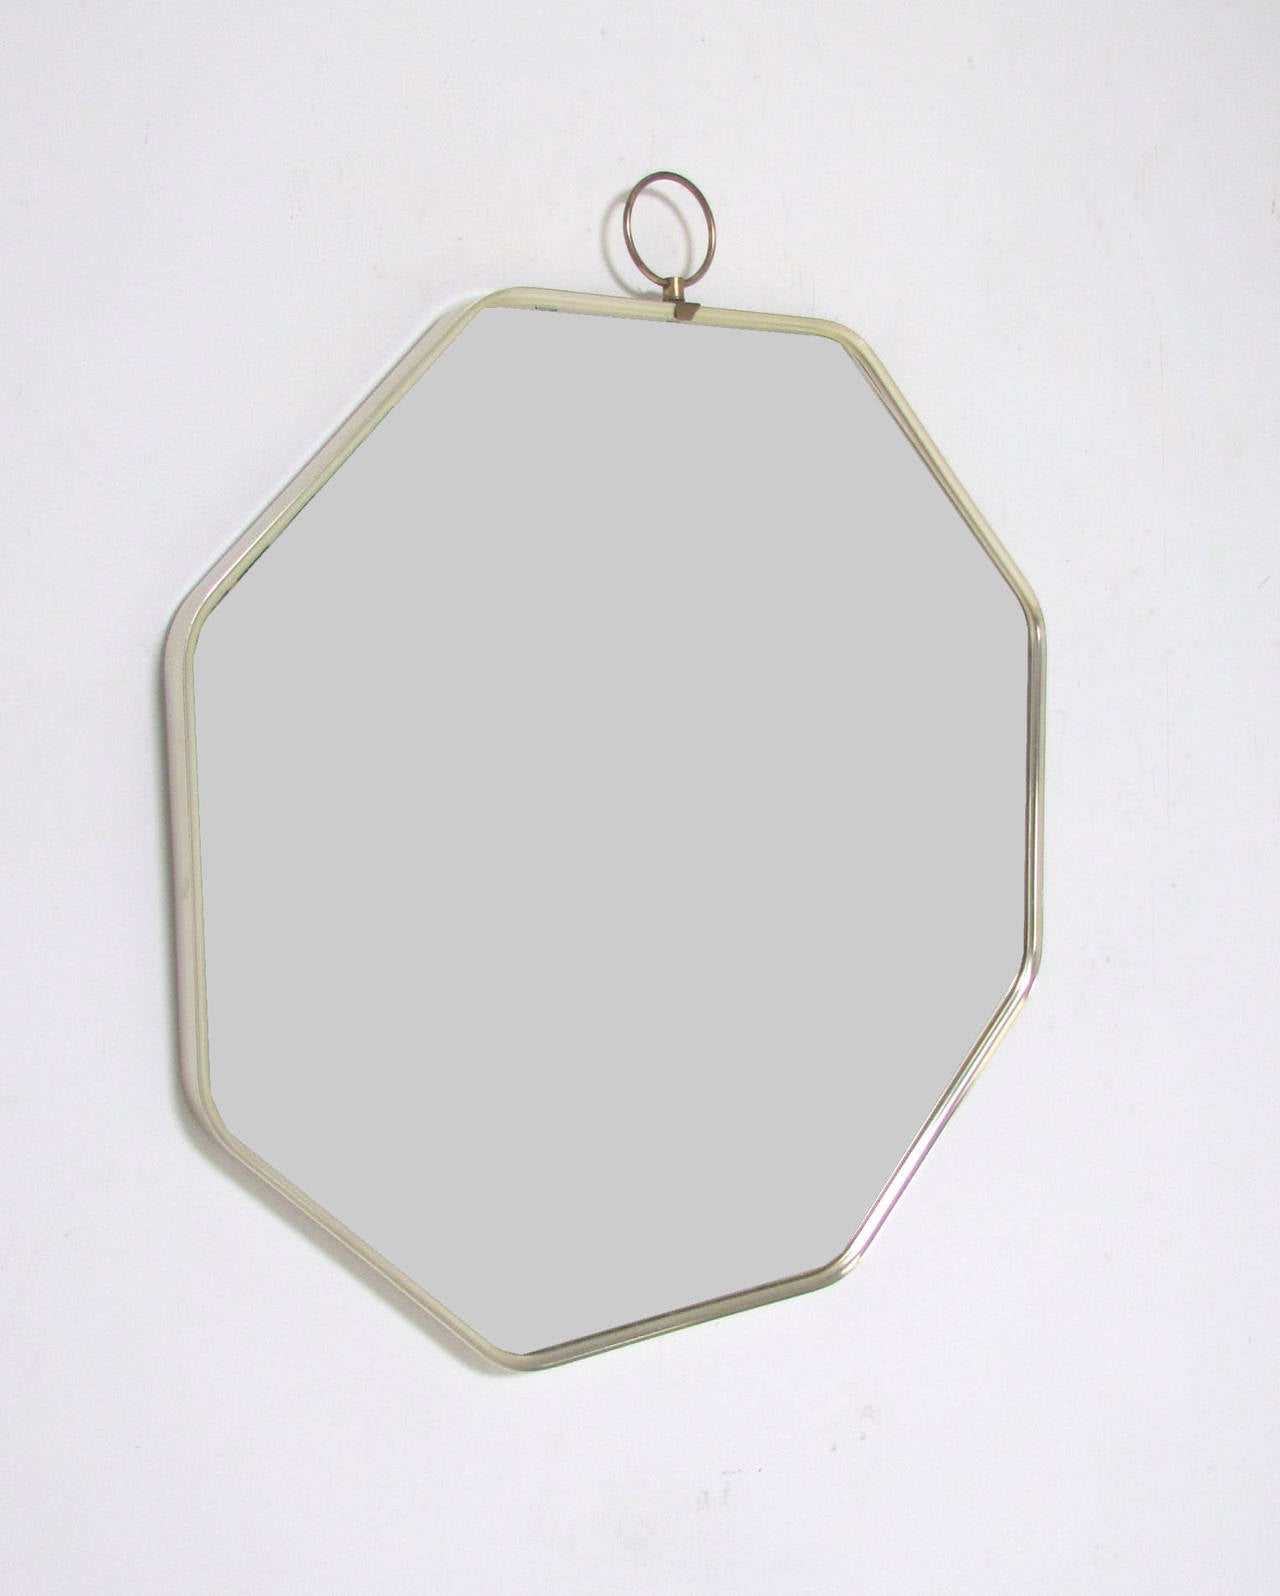 Italian modernist octagonal wall mirror with decorative top brass ring, circa 1960s, in the manner of Gio Ponti. Frame is anodized aluminum with a brass finish.